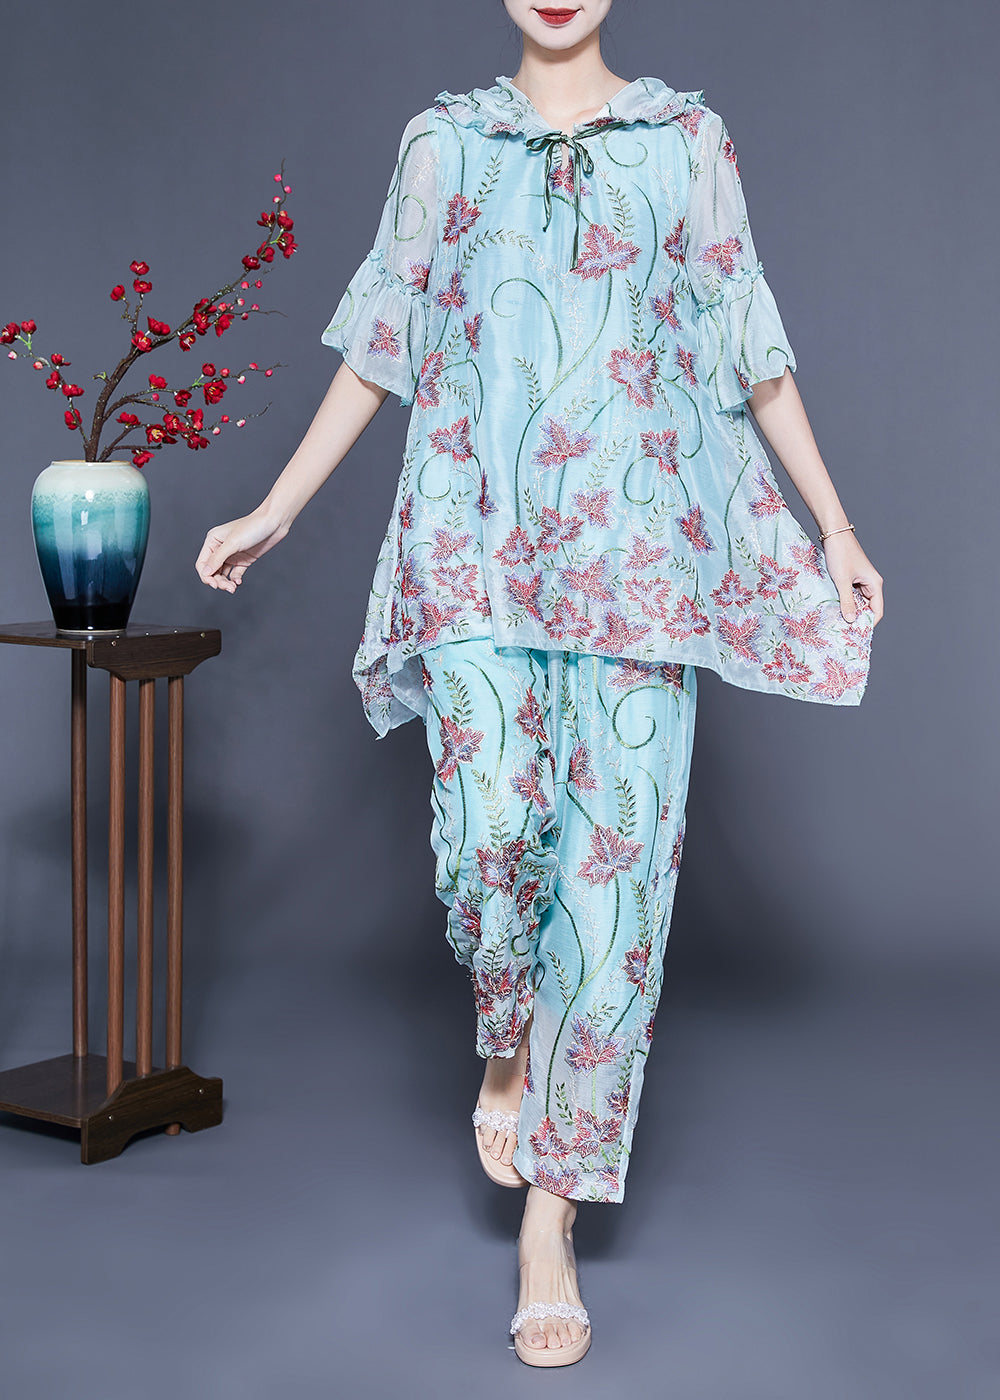 Chic Light Blue Hooded Ruffled Embroideried Silk Two Pieces Set Flare Sleeve LC0405 - fabuloryshop